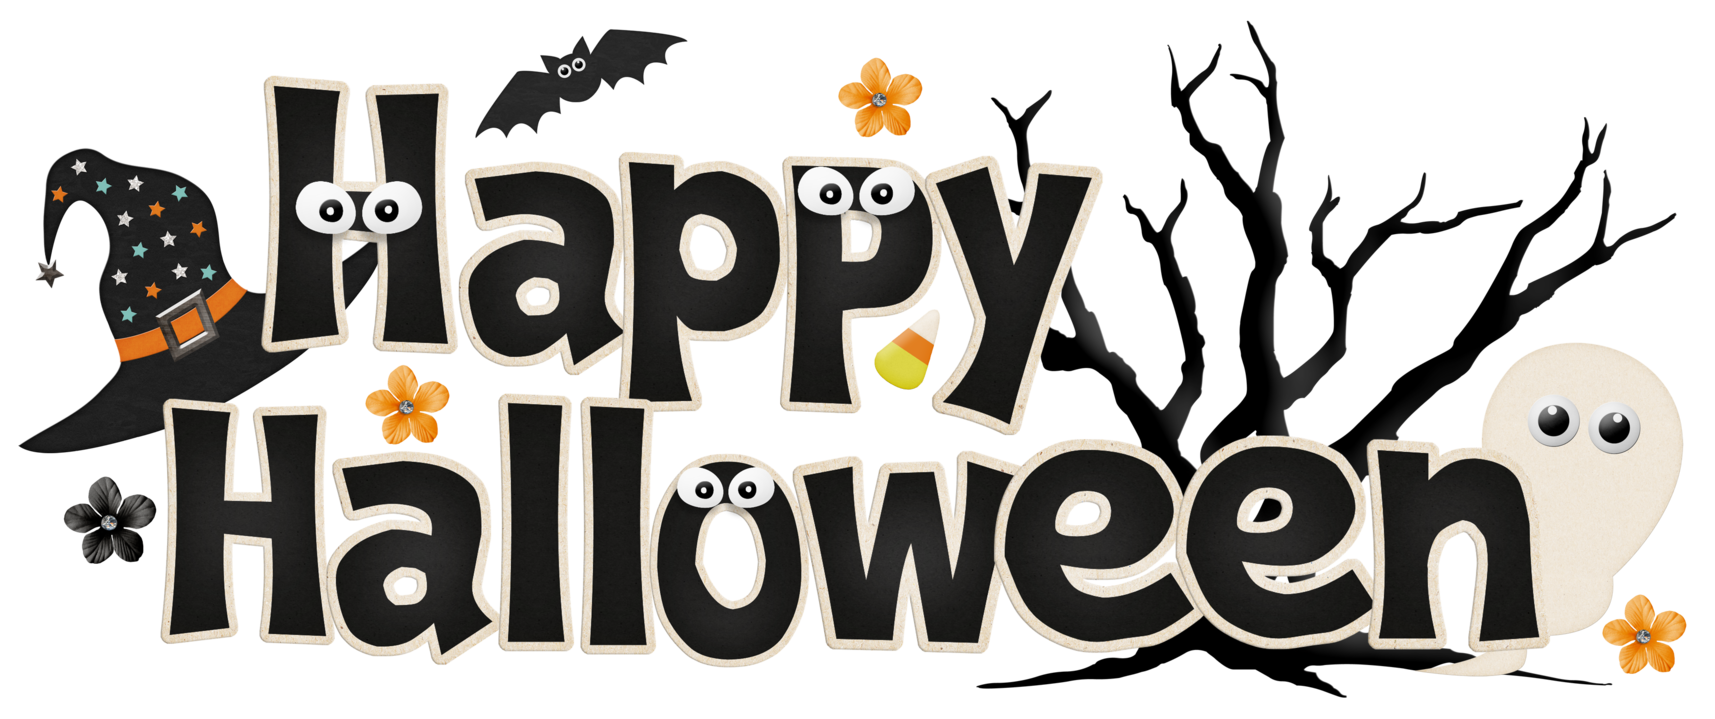 free animated october clipart - photo #29